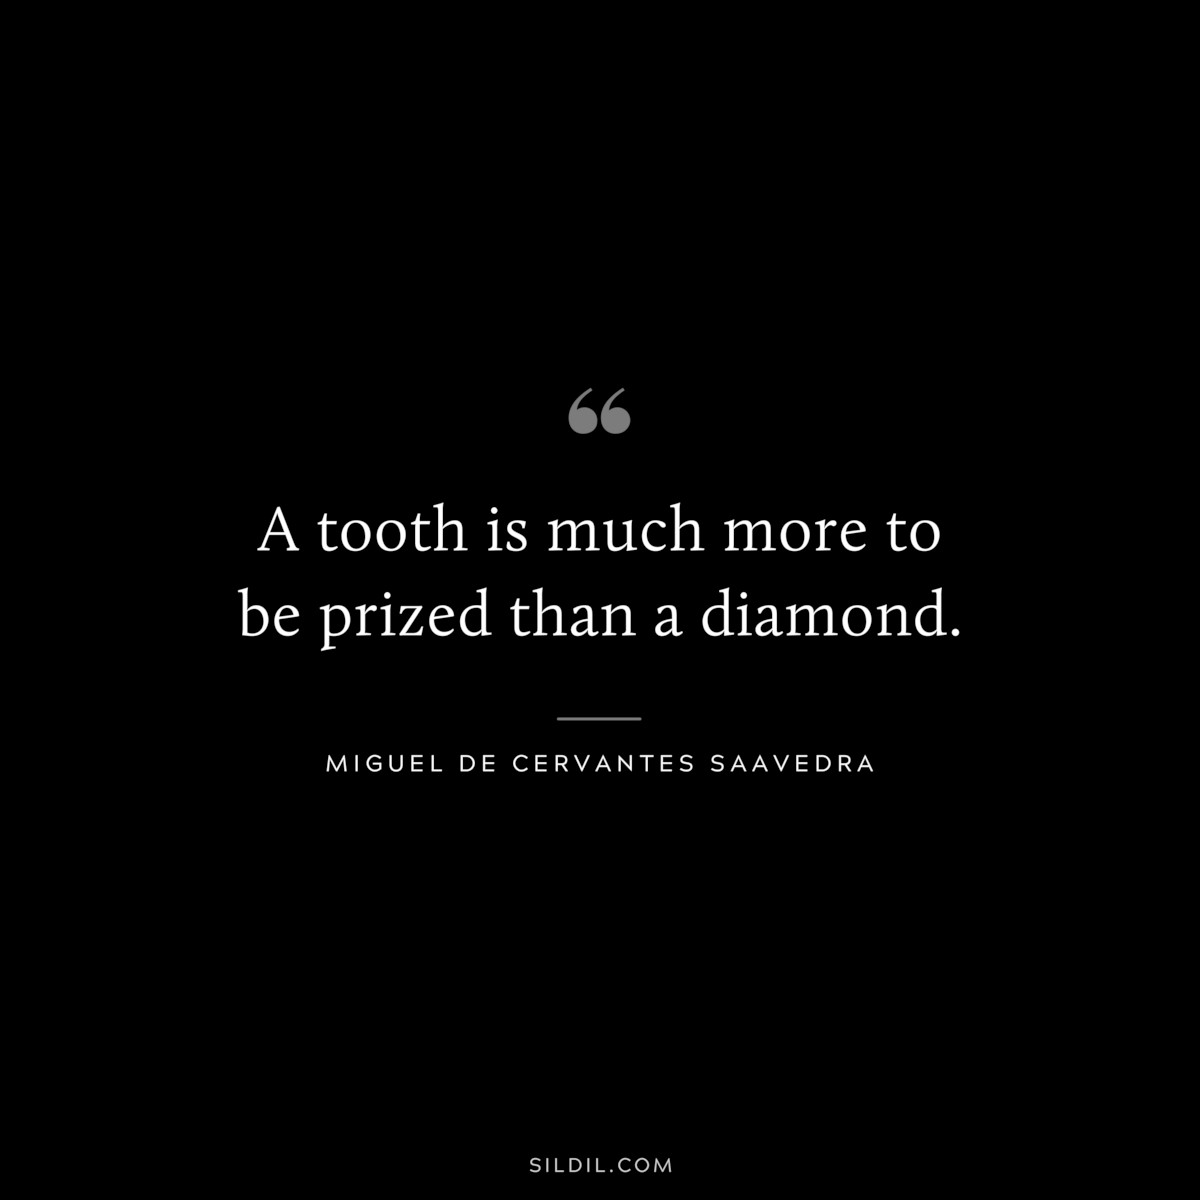 A tooth is much more to be prized than a diamond. ― Miguel de Cervantes Saavedra